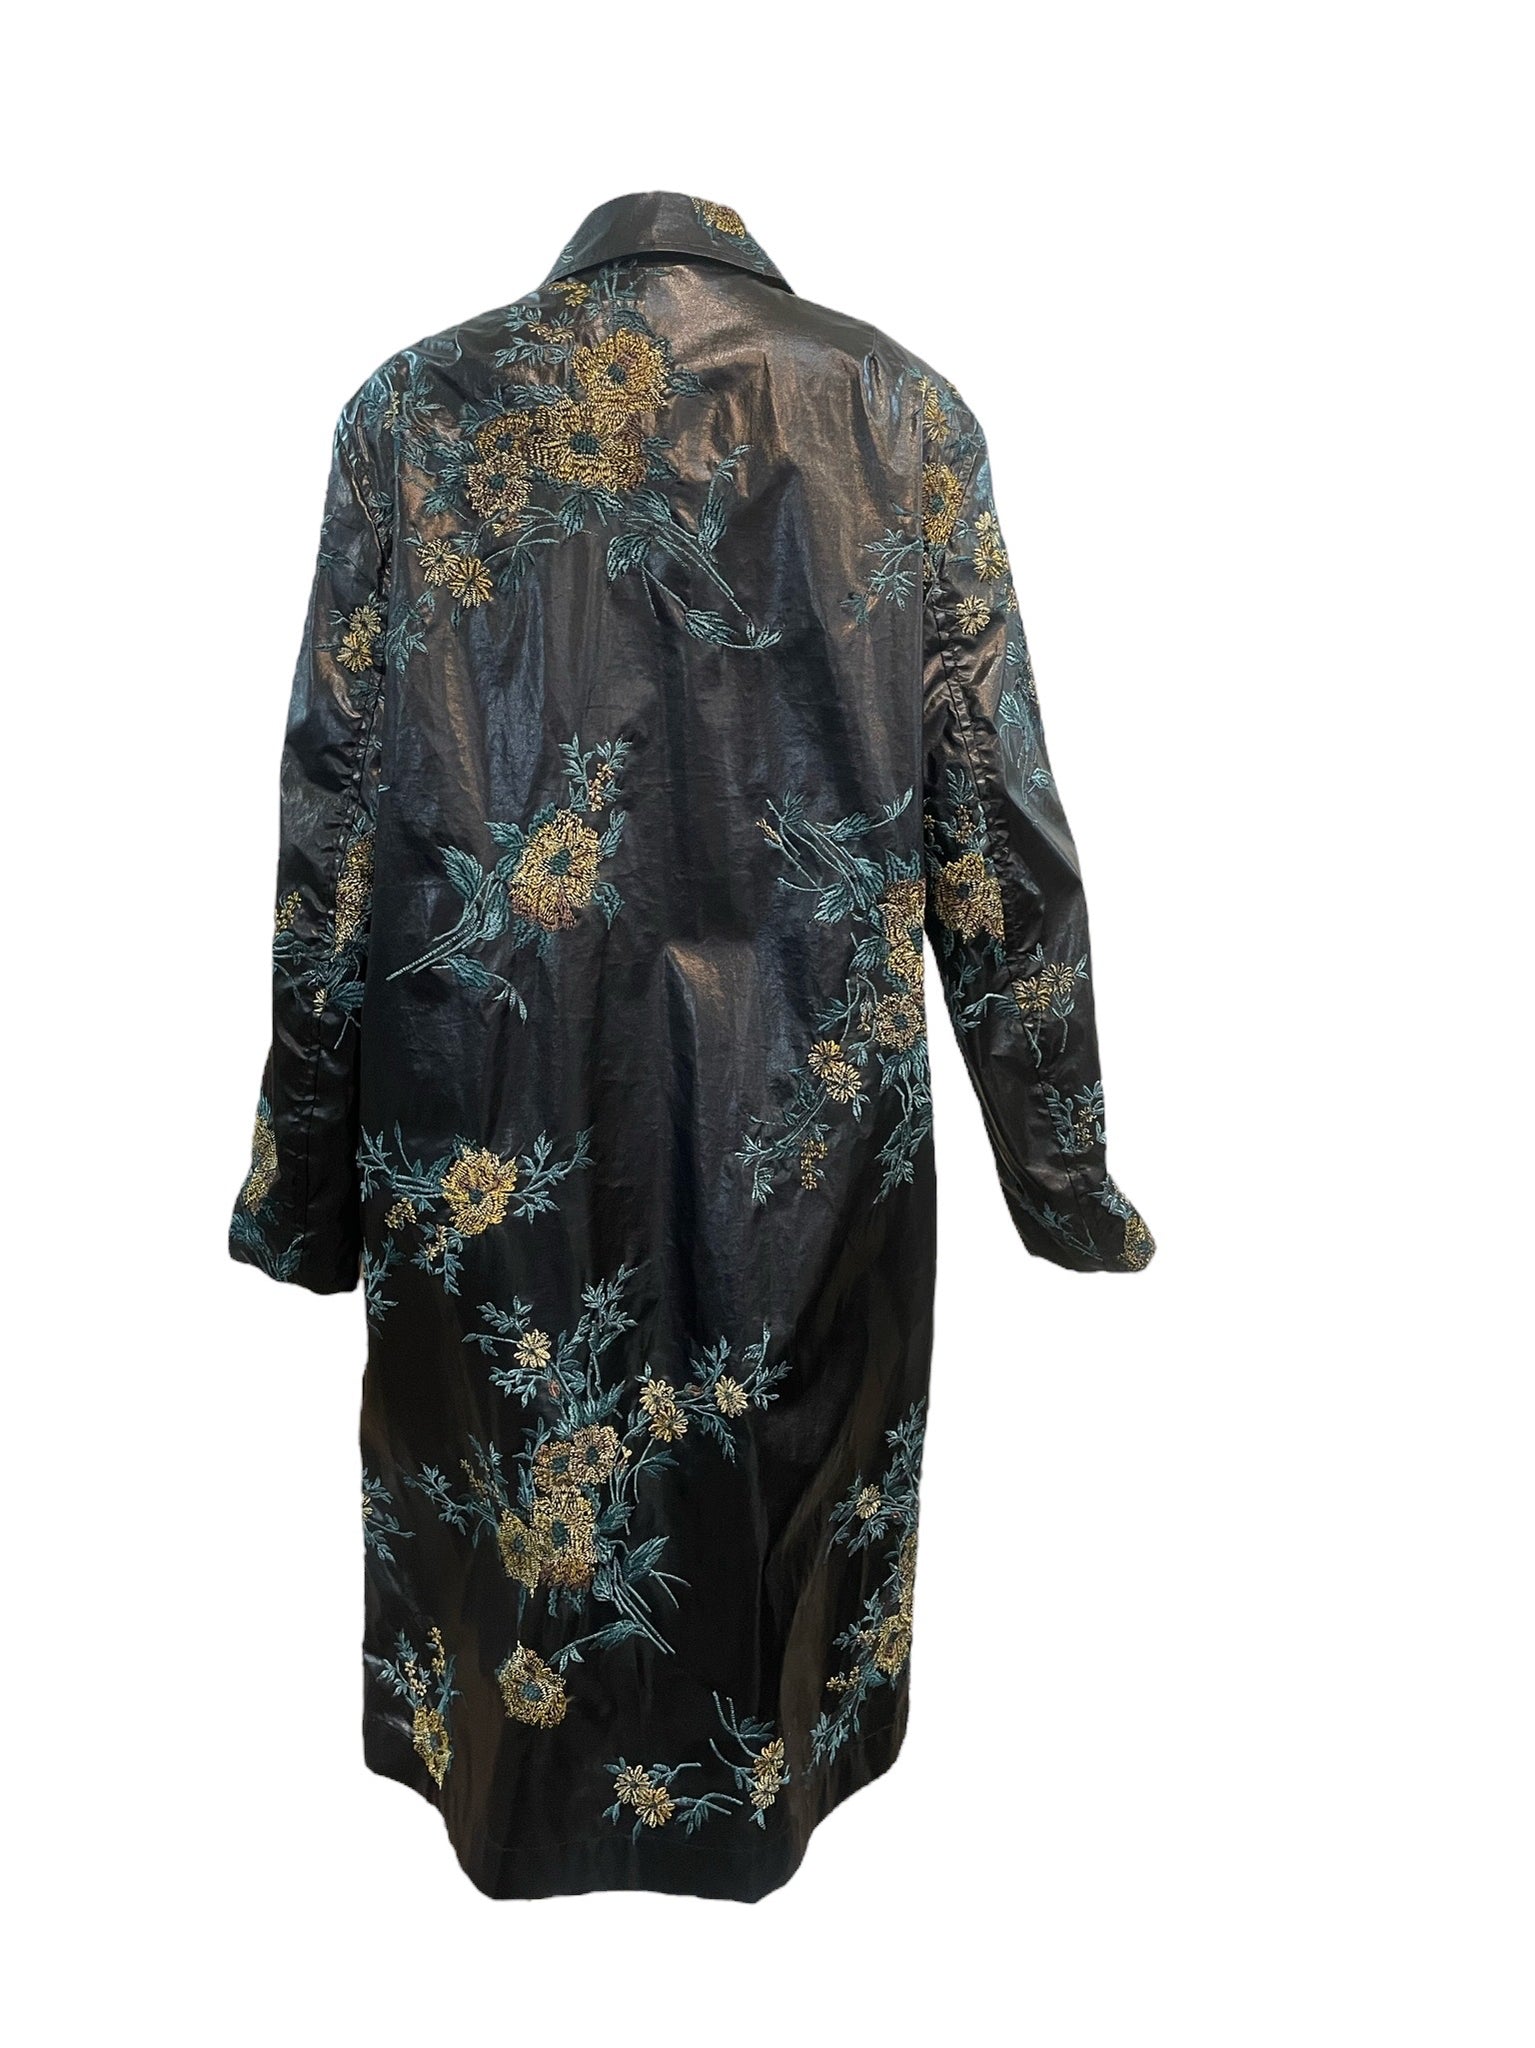 Dries van Noten Contemporary Floral Embroidered Rain Coat BACK 3 of 5